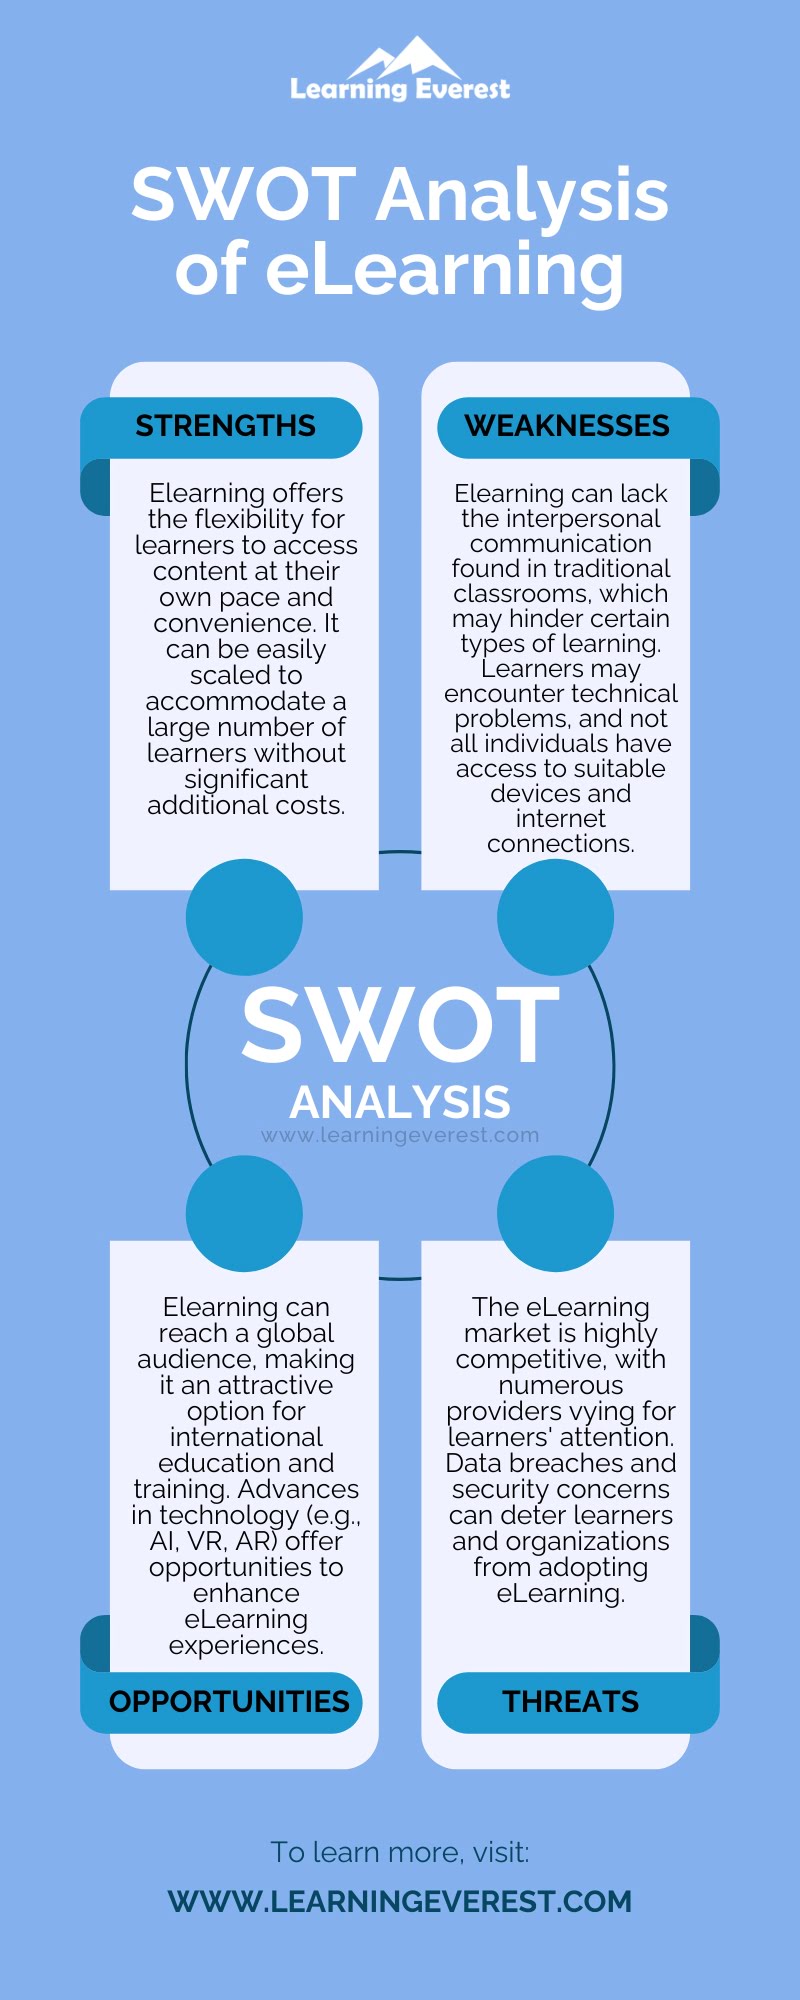 SWOT Analysis of eLearning